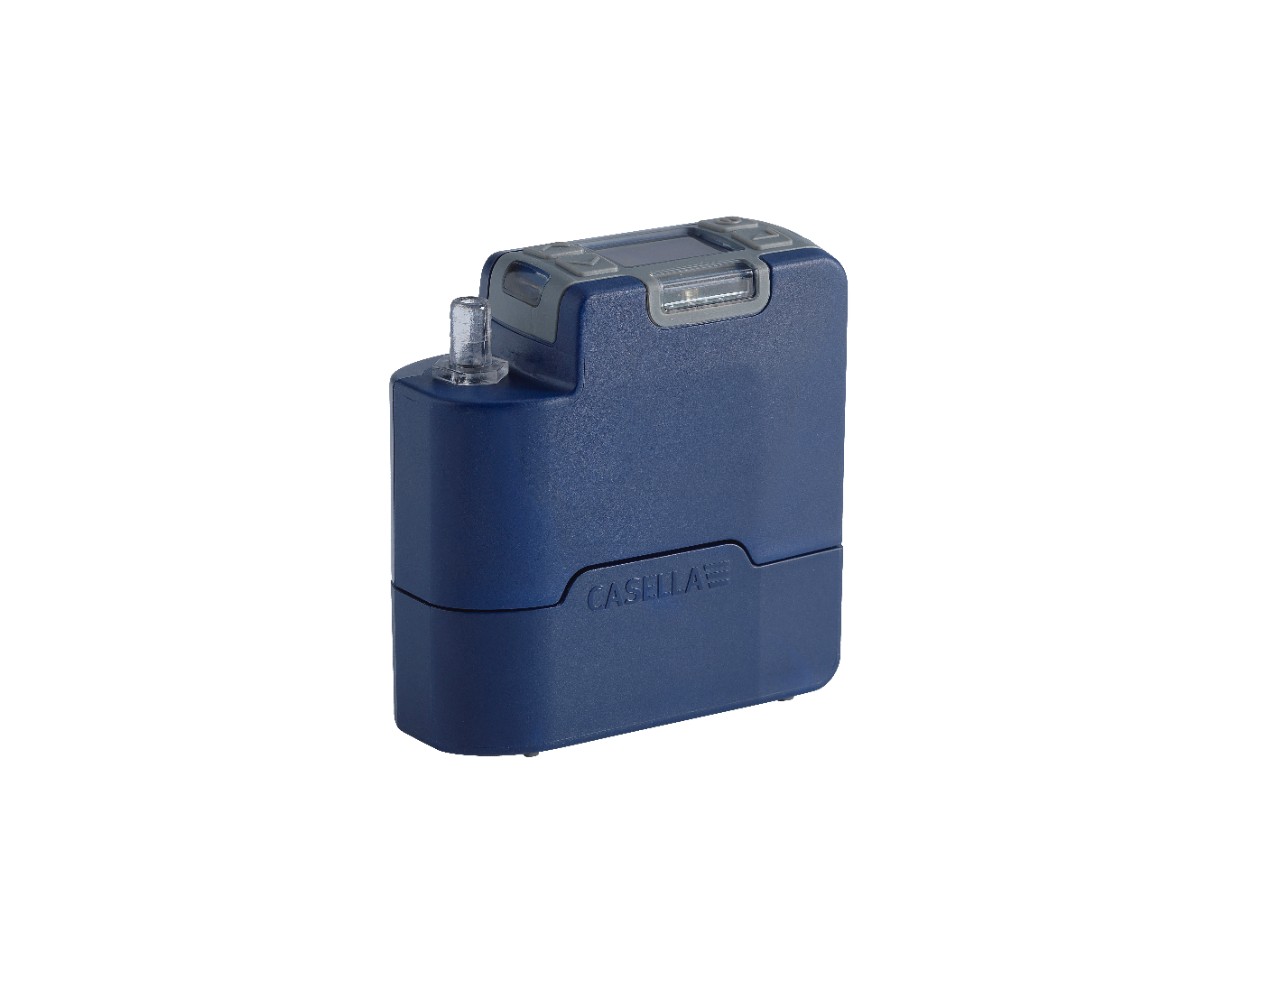 Casella's Personal Air Sampling Pump for low flow applications. It has been designed particularly for low flow sampling of vapors and gases in working environments.